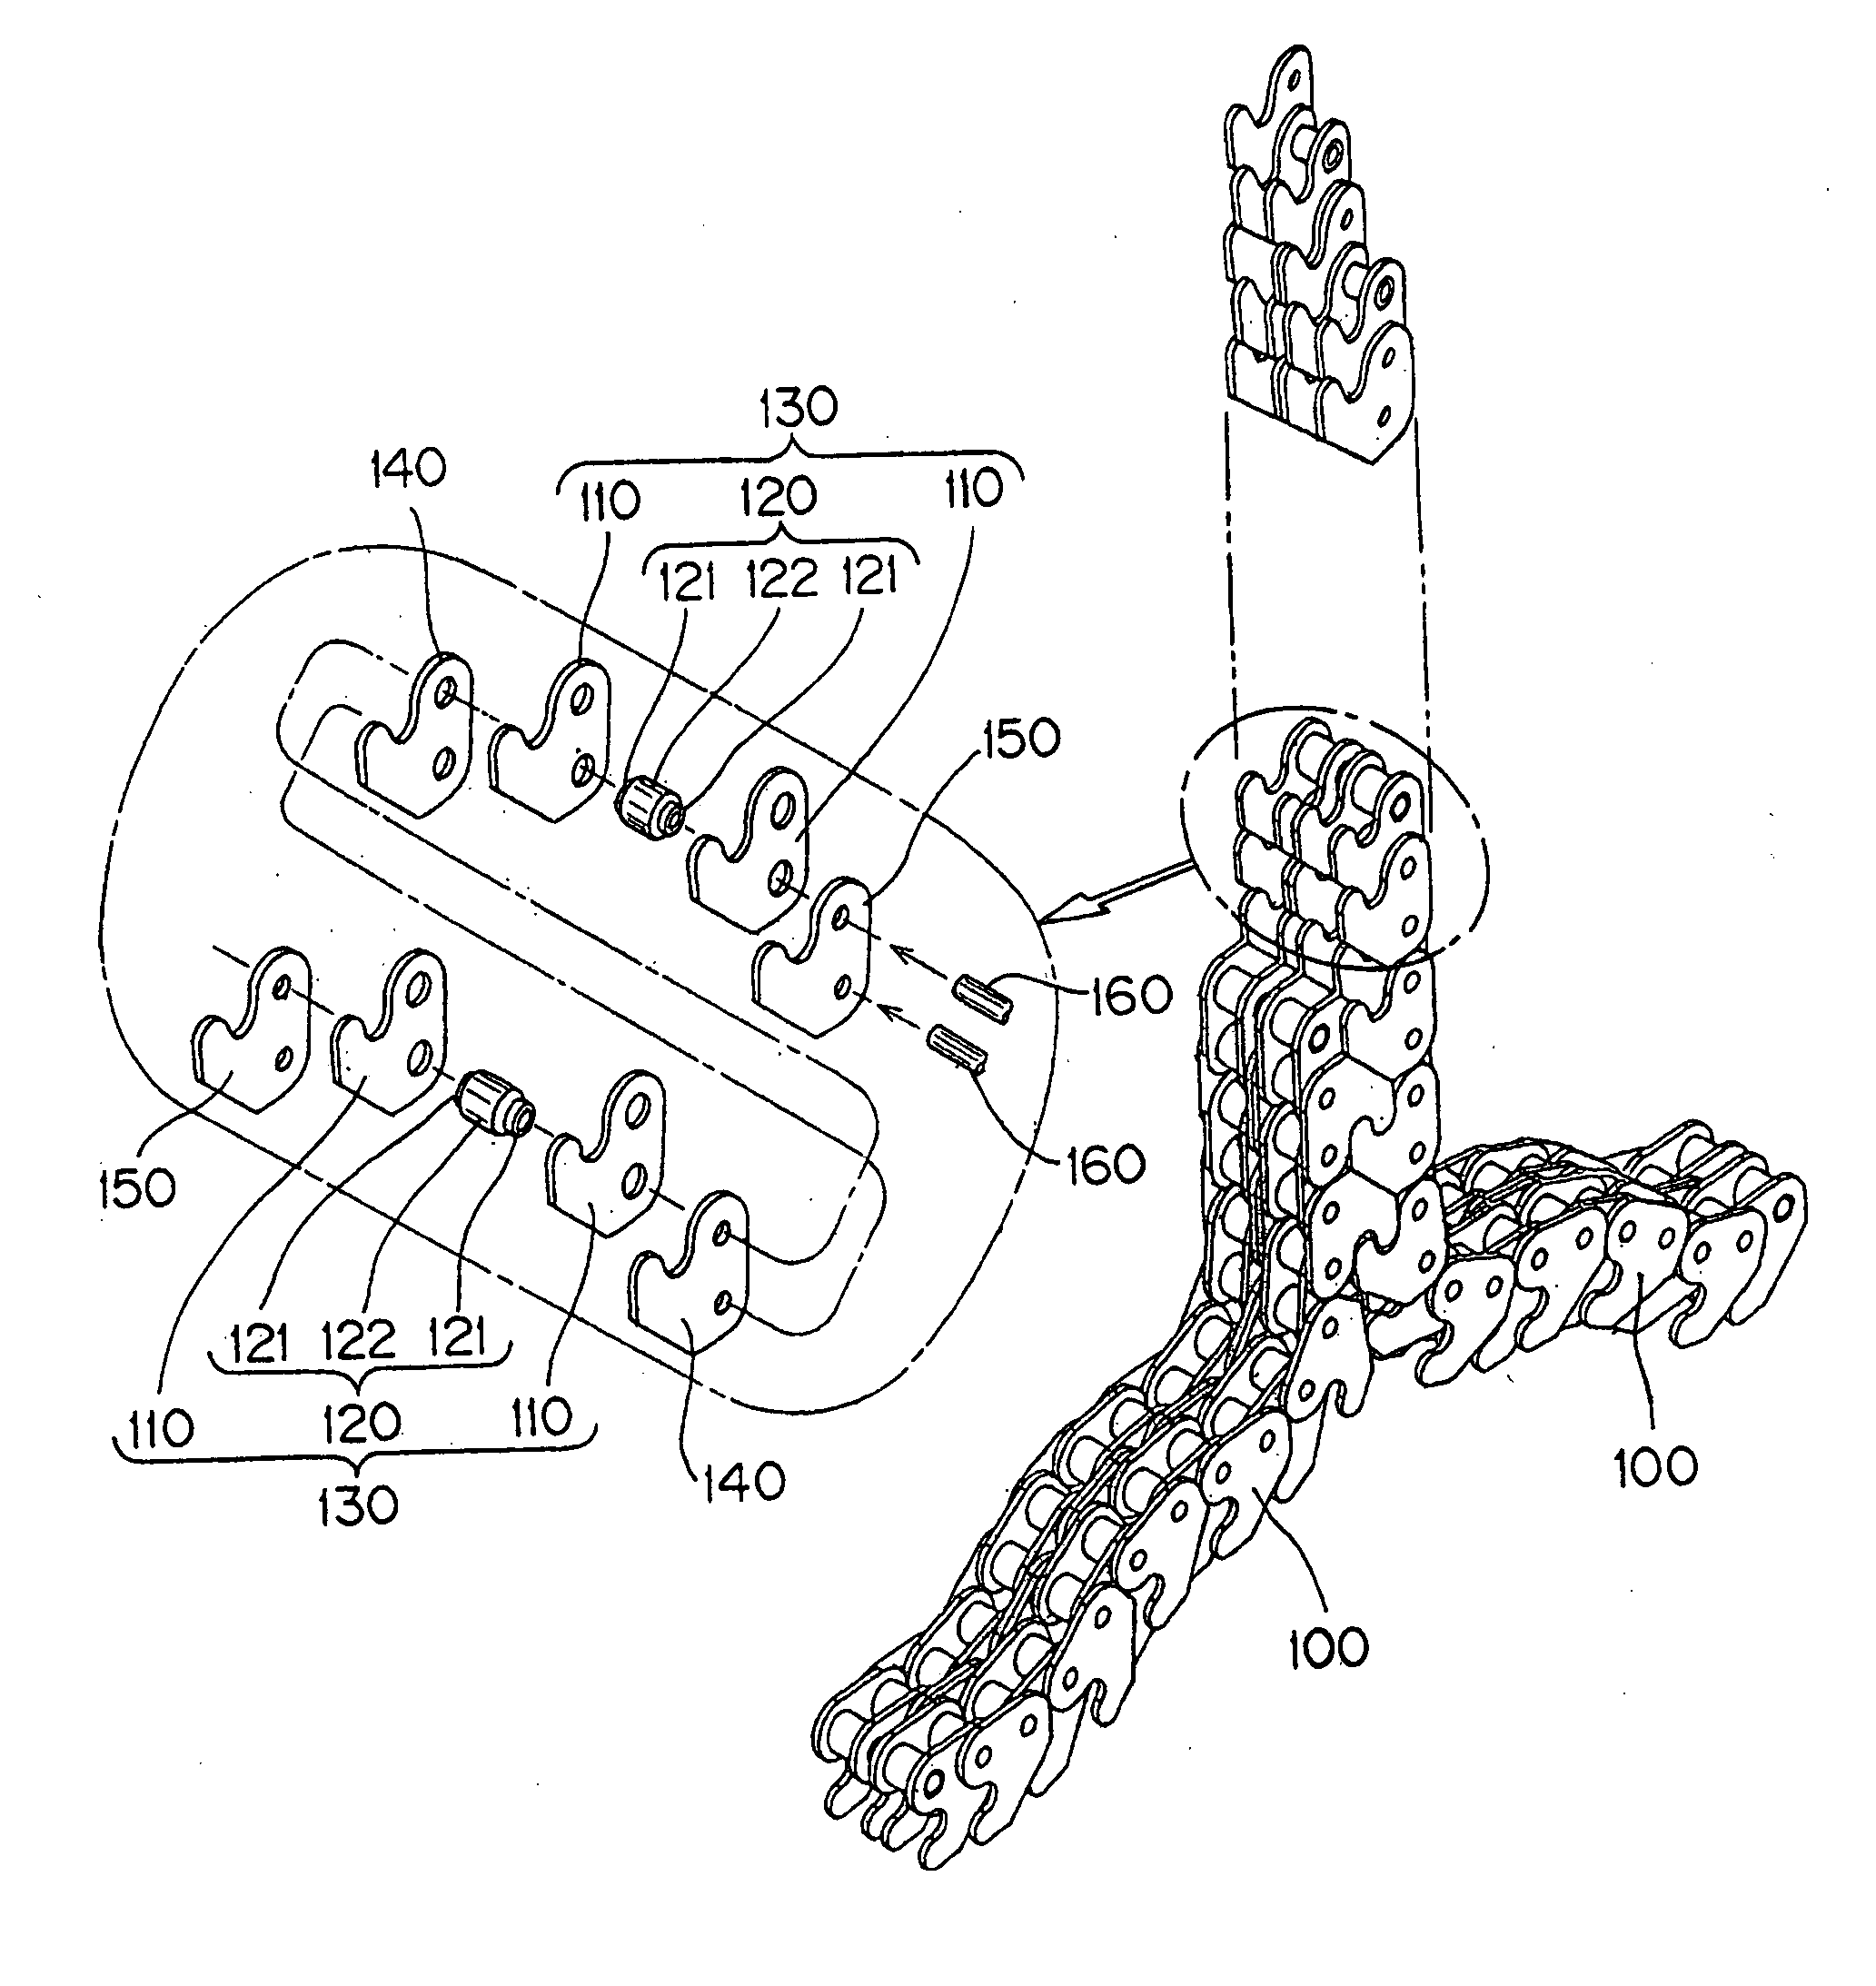 Hoisting and lowering driving engagement multi-row chain